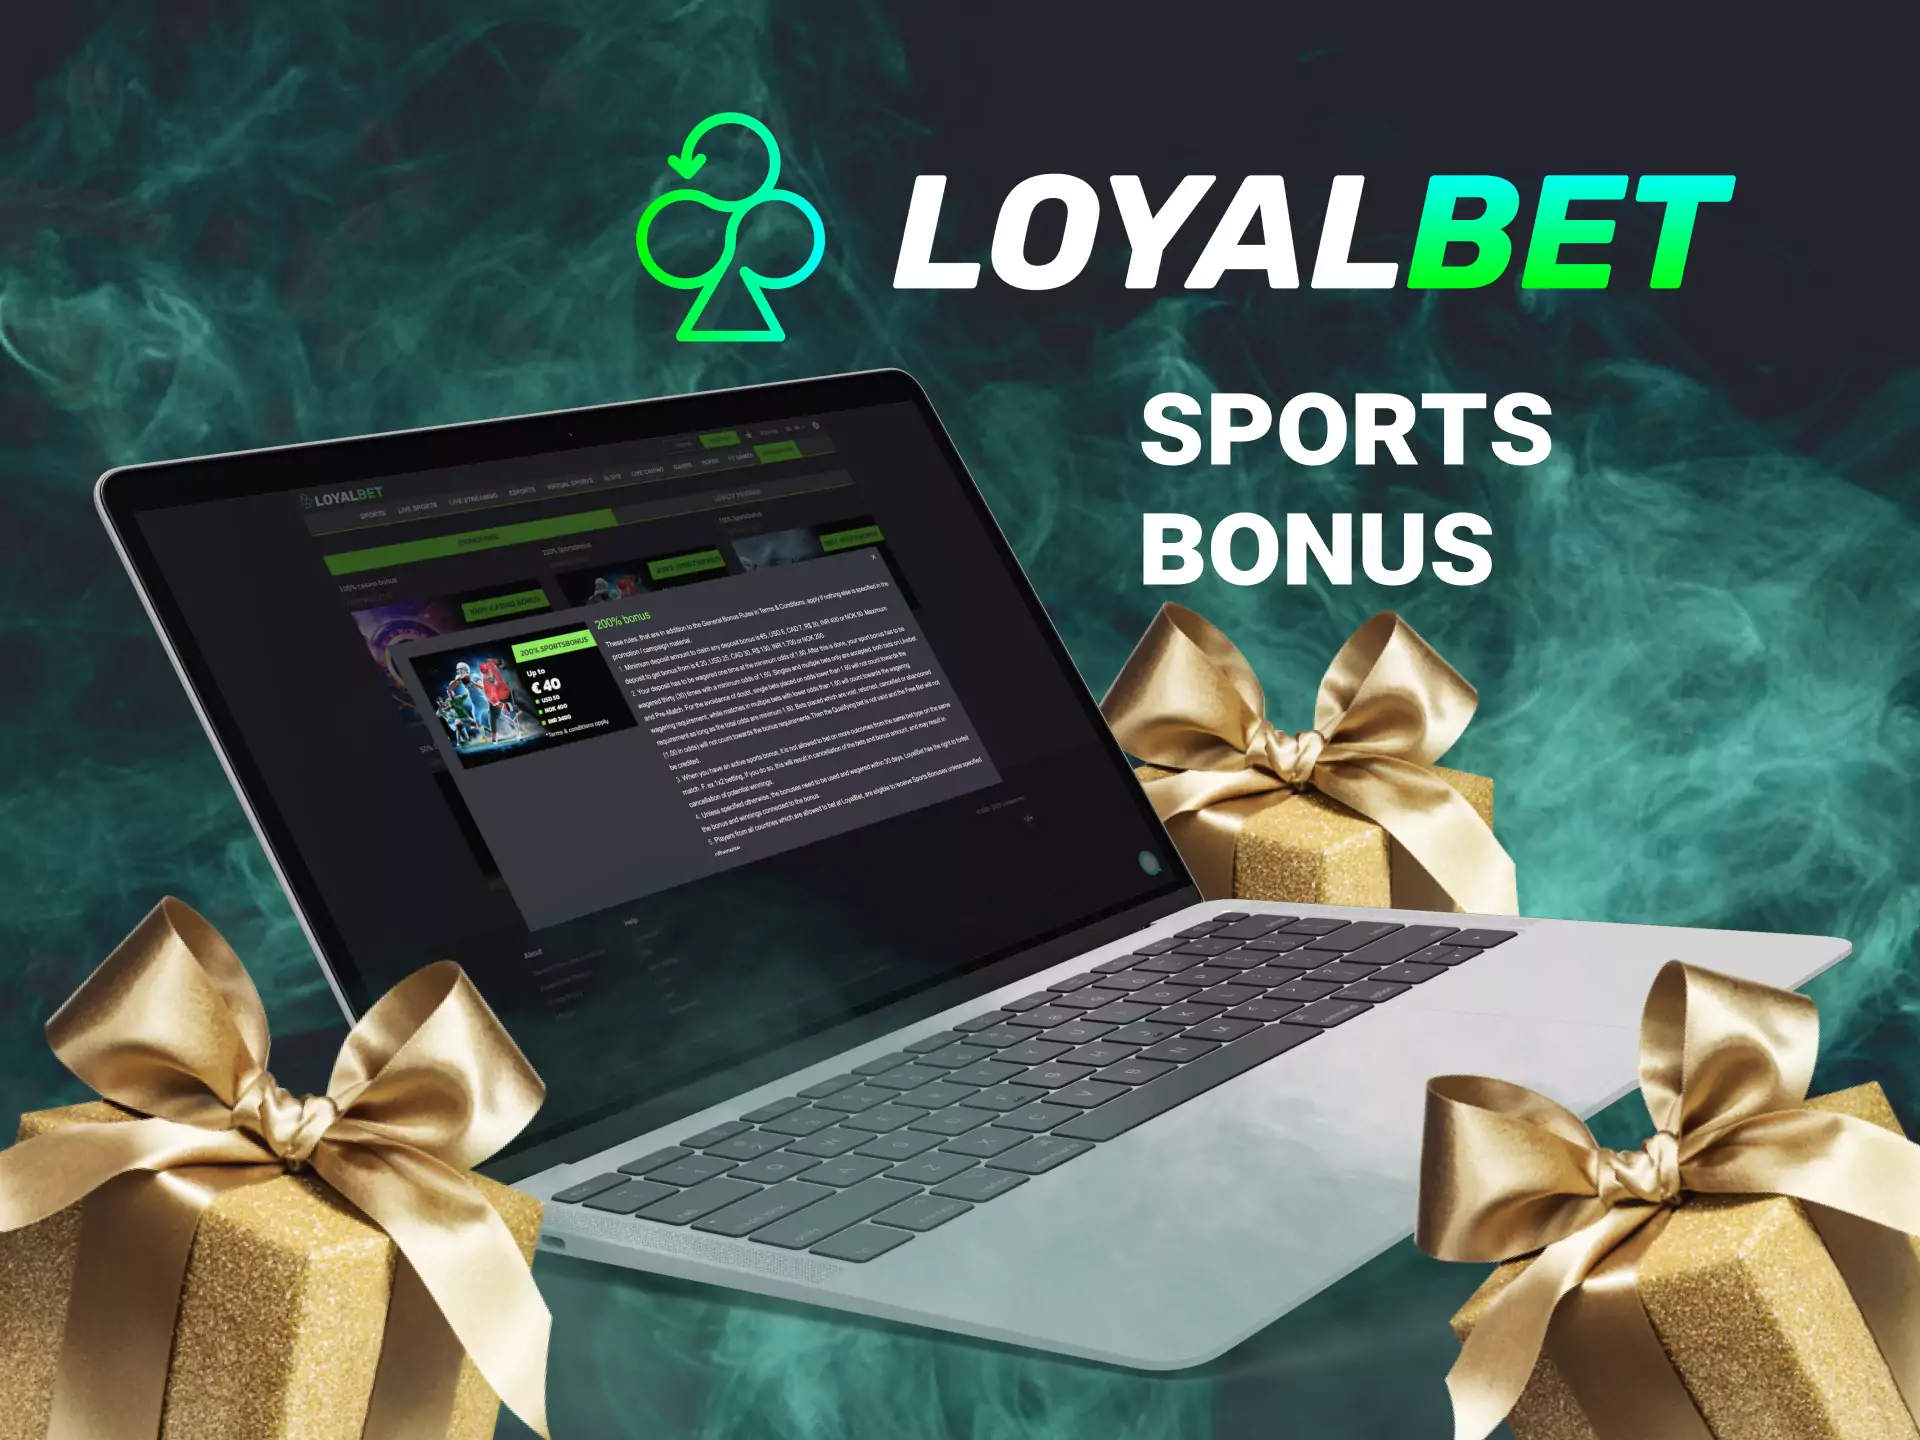 You can get a bonus on sports betting on Loyalbet.